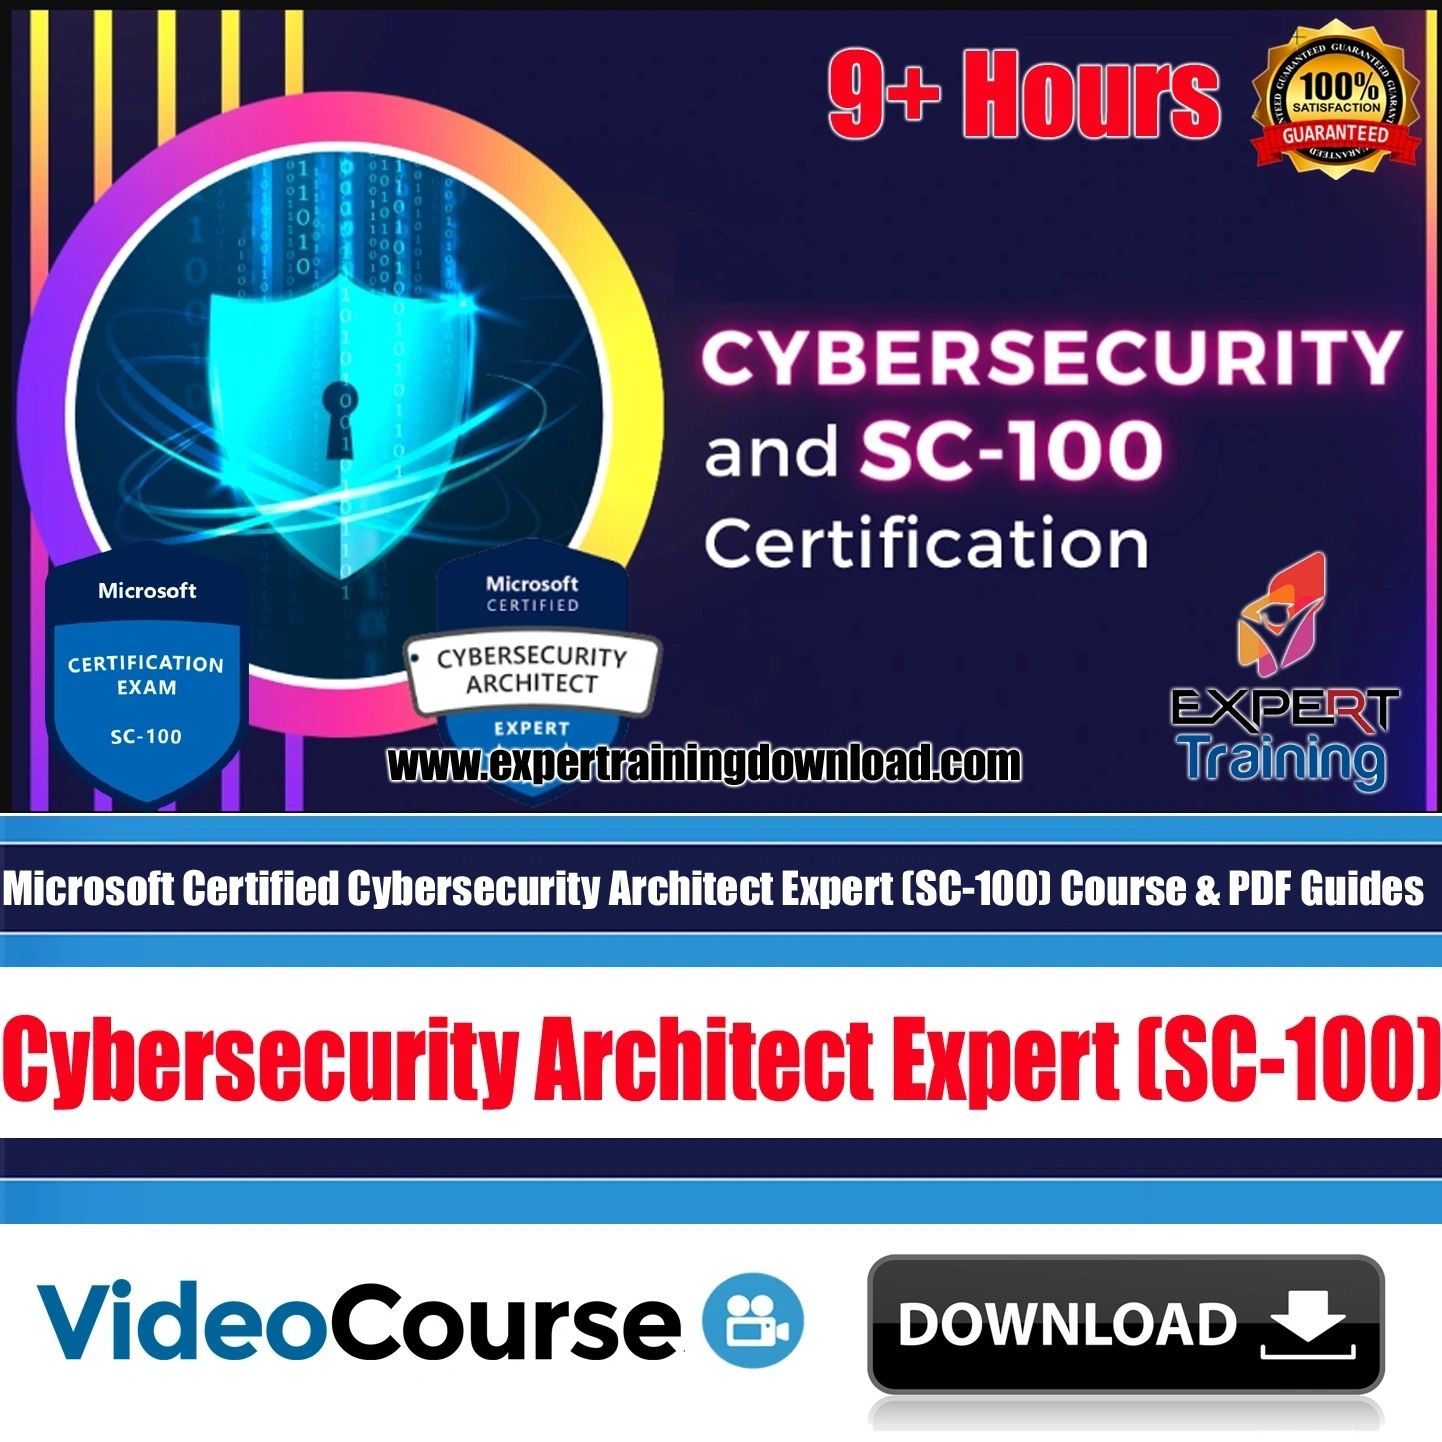 Microsoft Certified Cybersecurity Architect Expert (SC-100) Course & PDF Guides